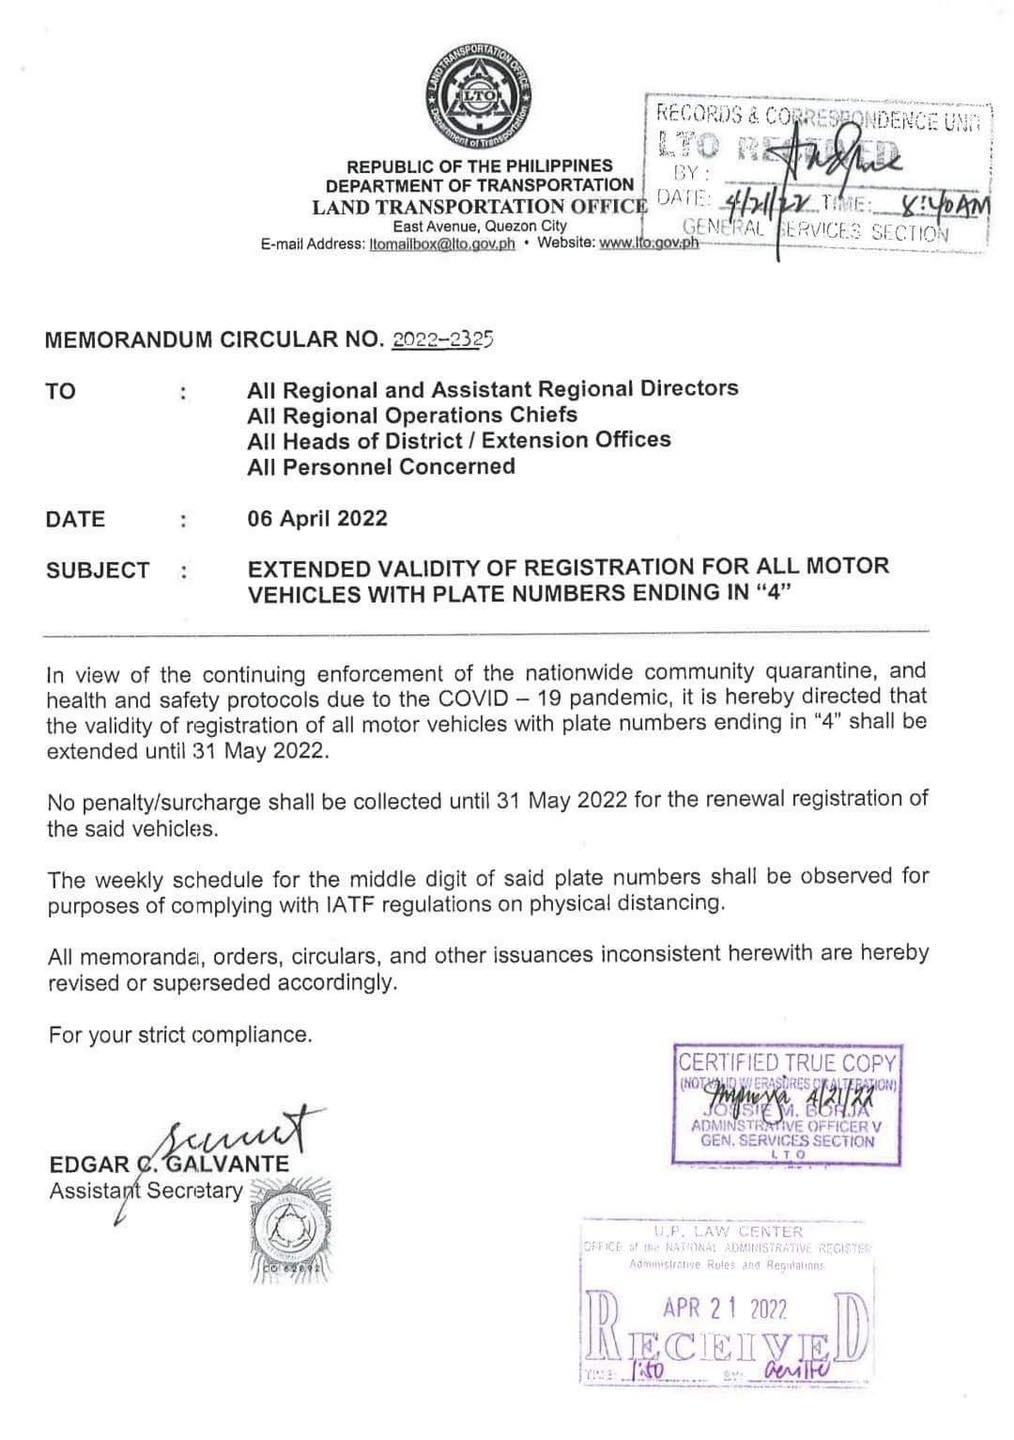 A copy of the LTO Memorandum granting an extension of the validity of registration of vehicles with plate number ending in 4 until May 31.